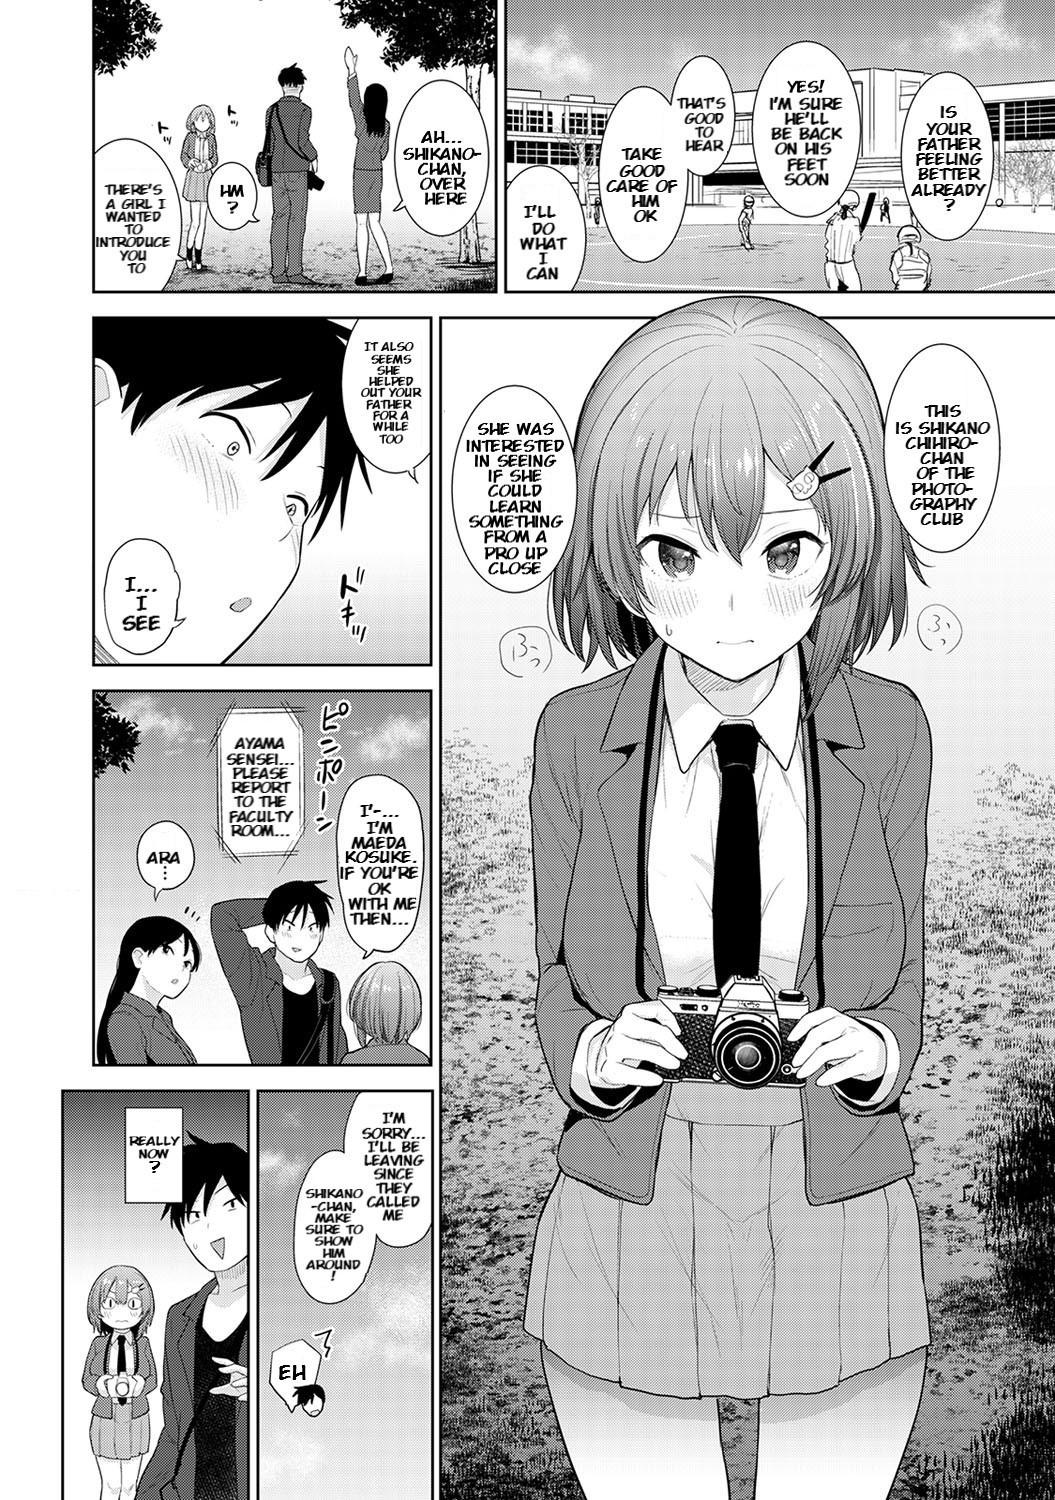 SotsuAl Cameraman to Shite Ichinenkan Joshikou no Event e Doukou Suru Koto ni Natta Hanashi | A Story About How I Ended Up Being A Yearbook Camerman at an All Girls' School For A Year Ch. 1 2